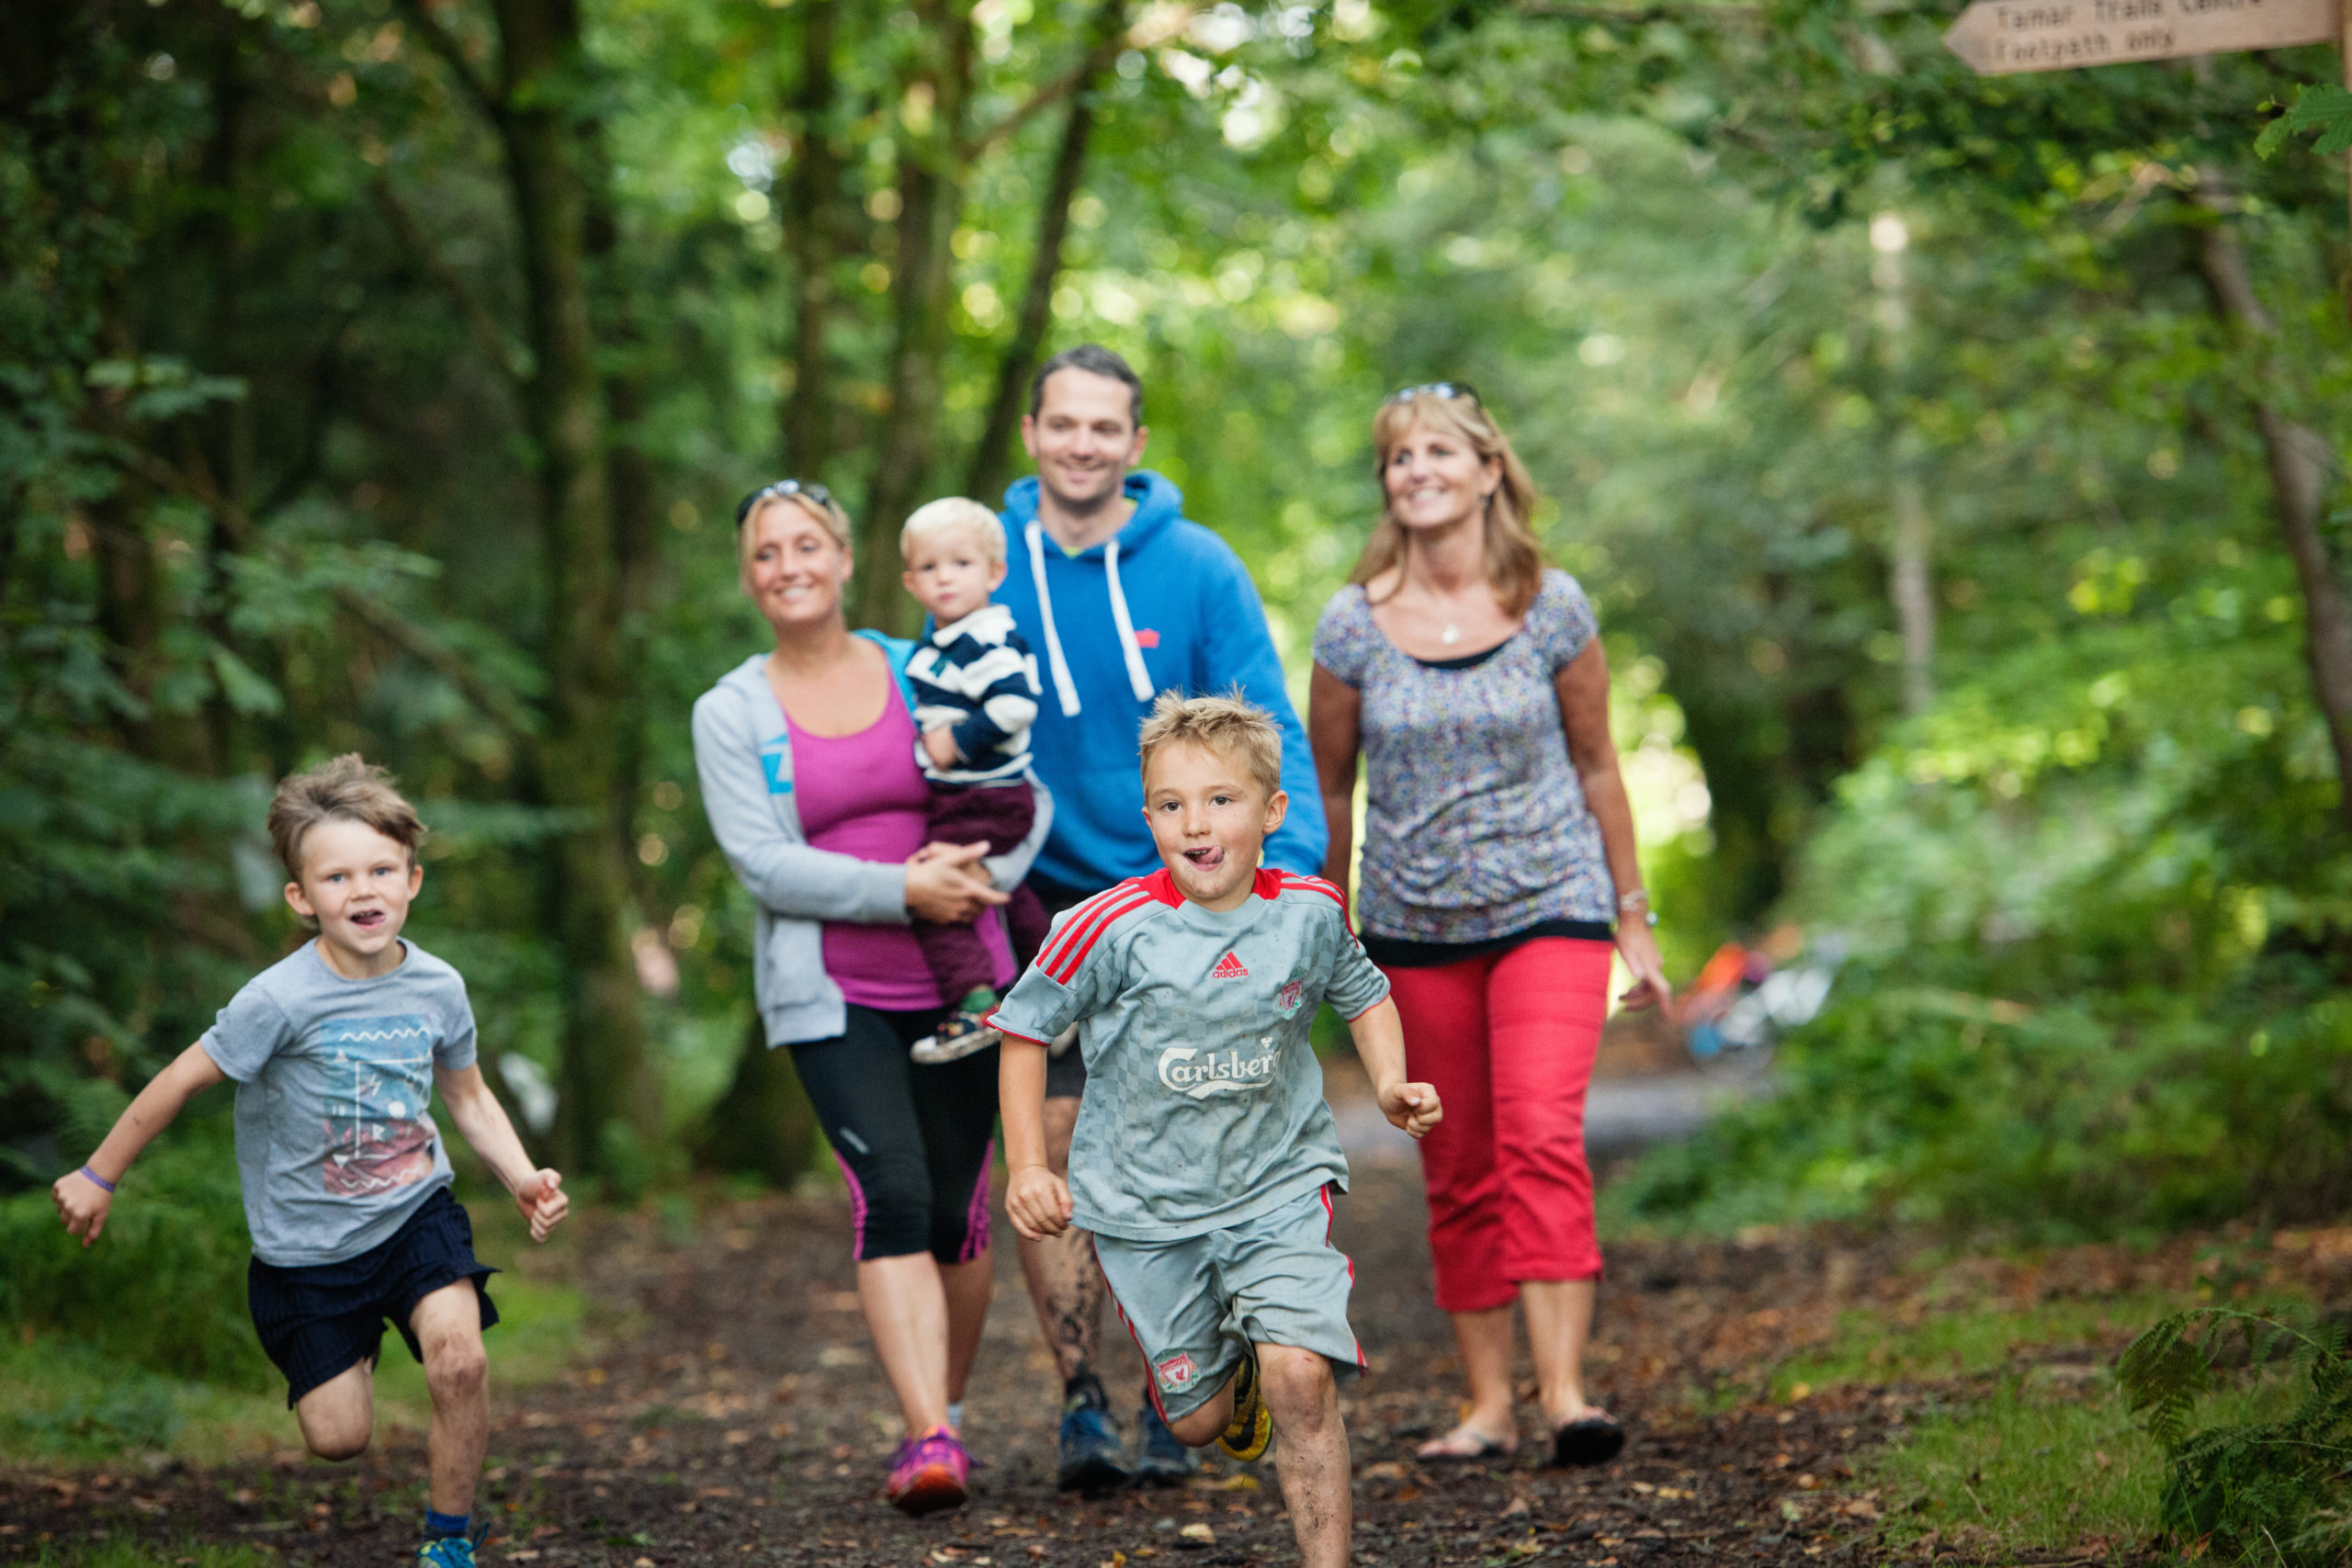 Family activites for free at the Tamar Trails